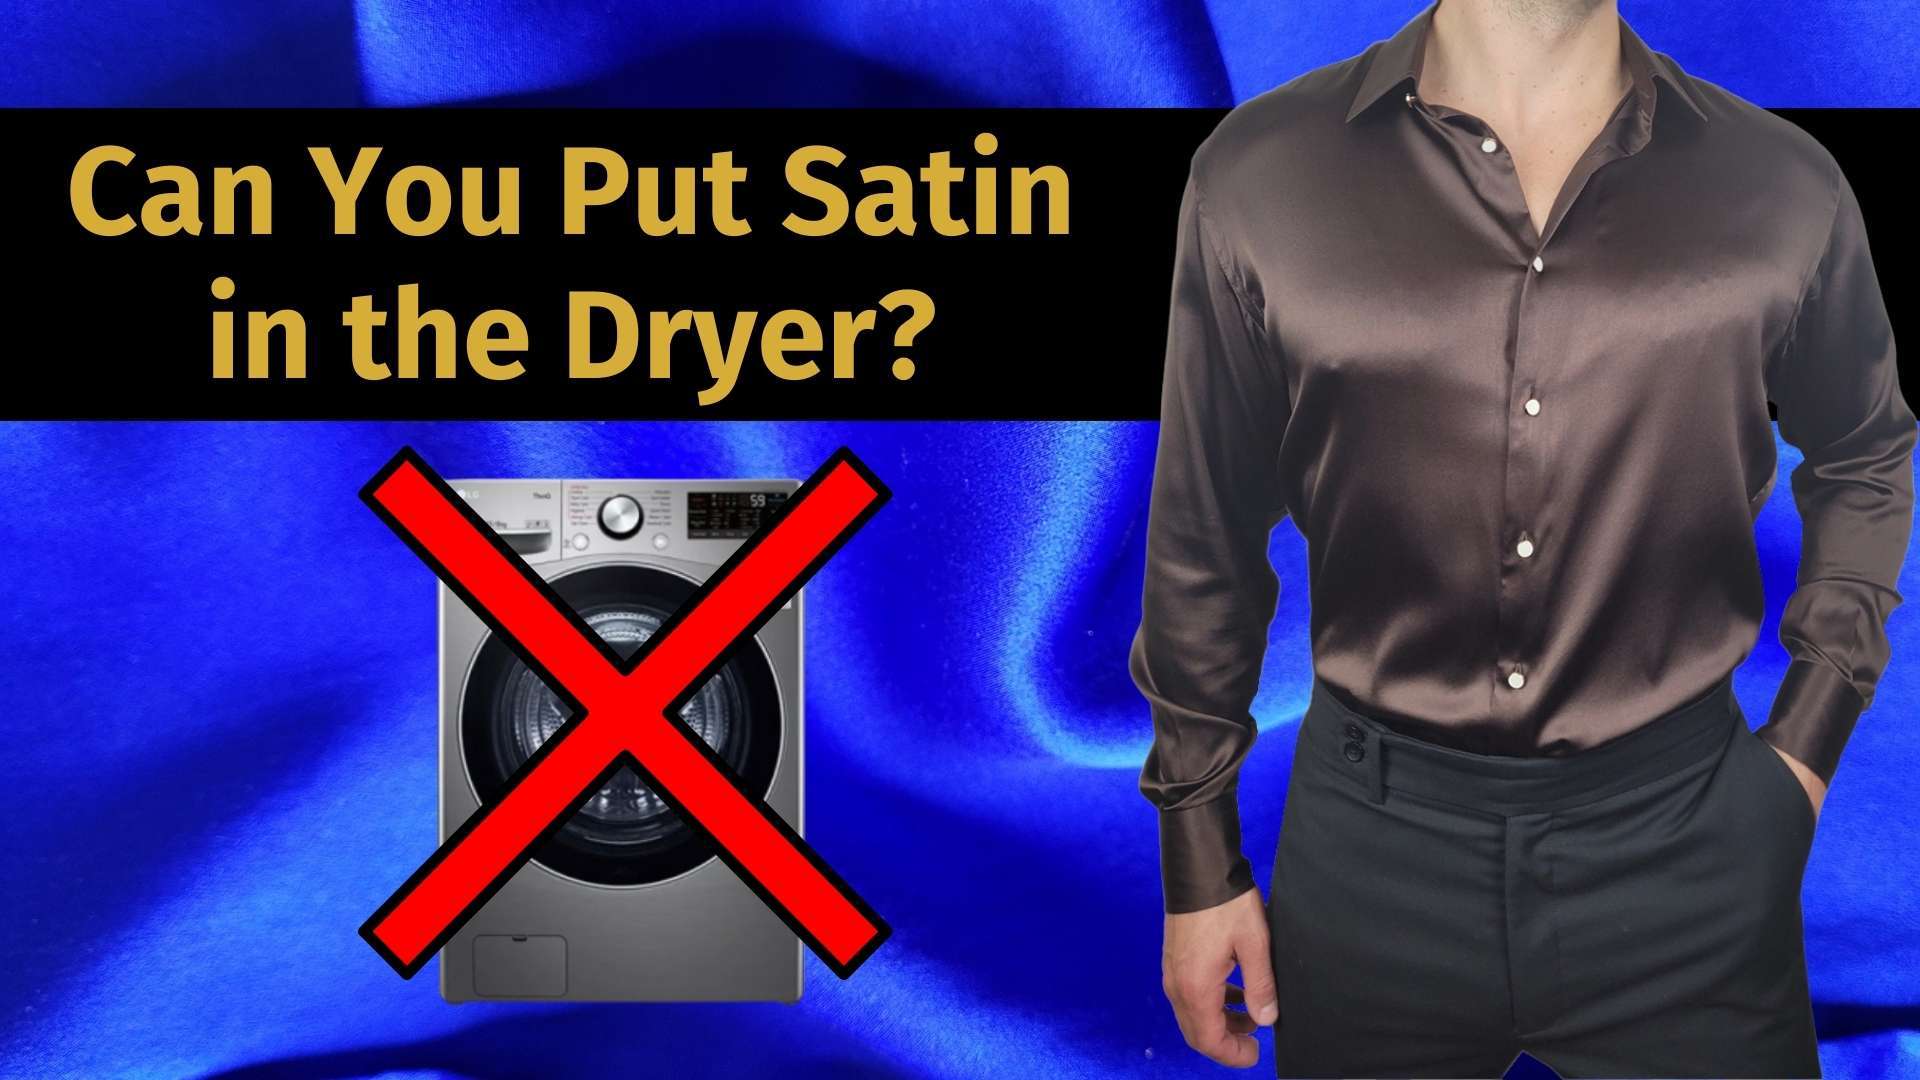 can you put satin in the dryer banner image with a dryer machine with an X on it and a man wearing a brown satin shirt